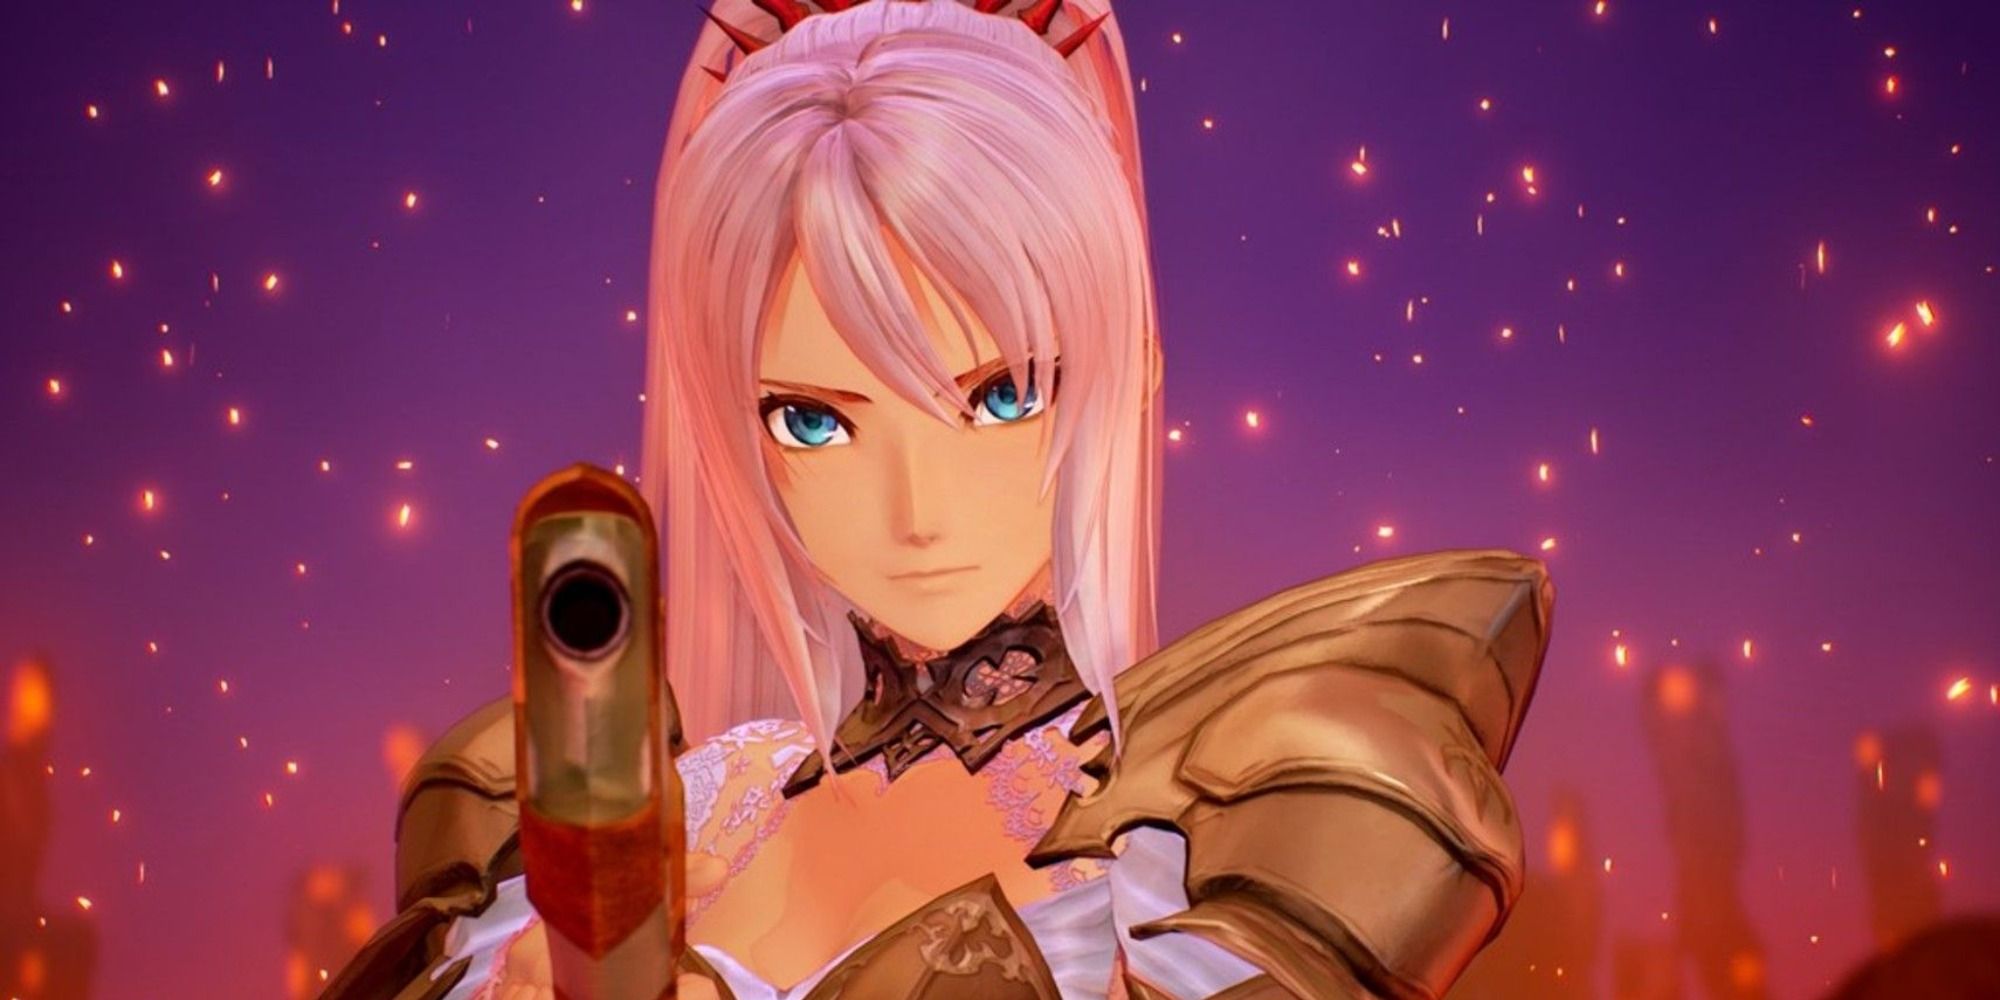 Shionne aiming her rifle in Tales of Arise